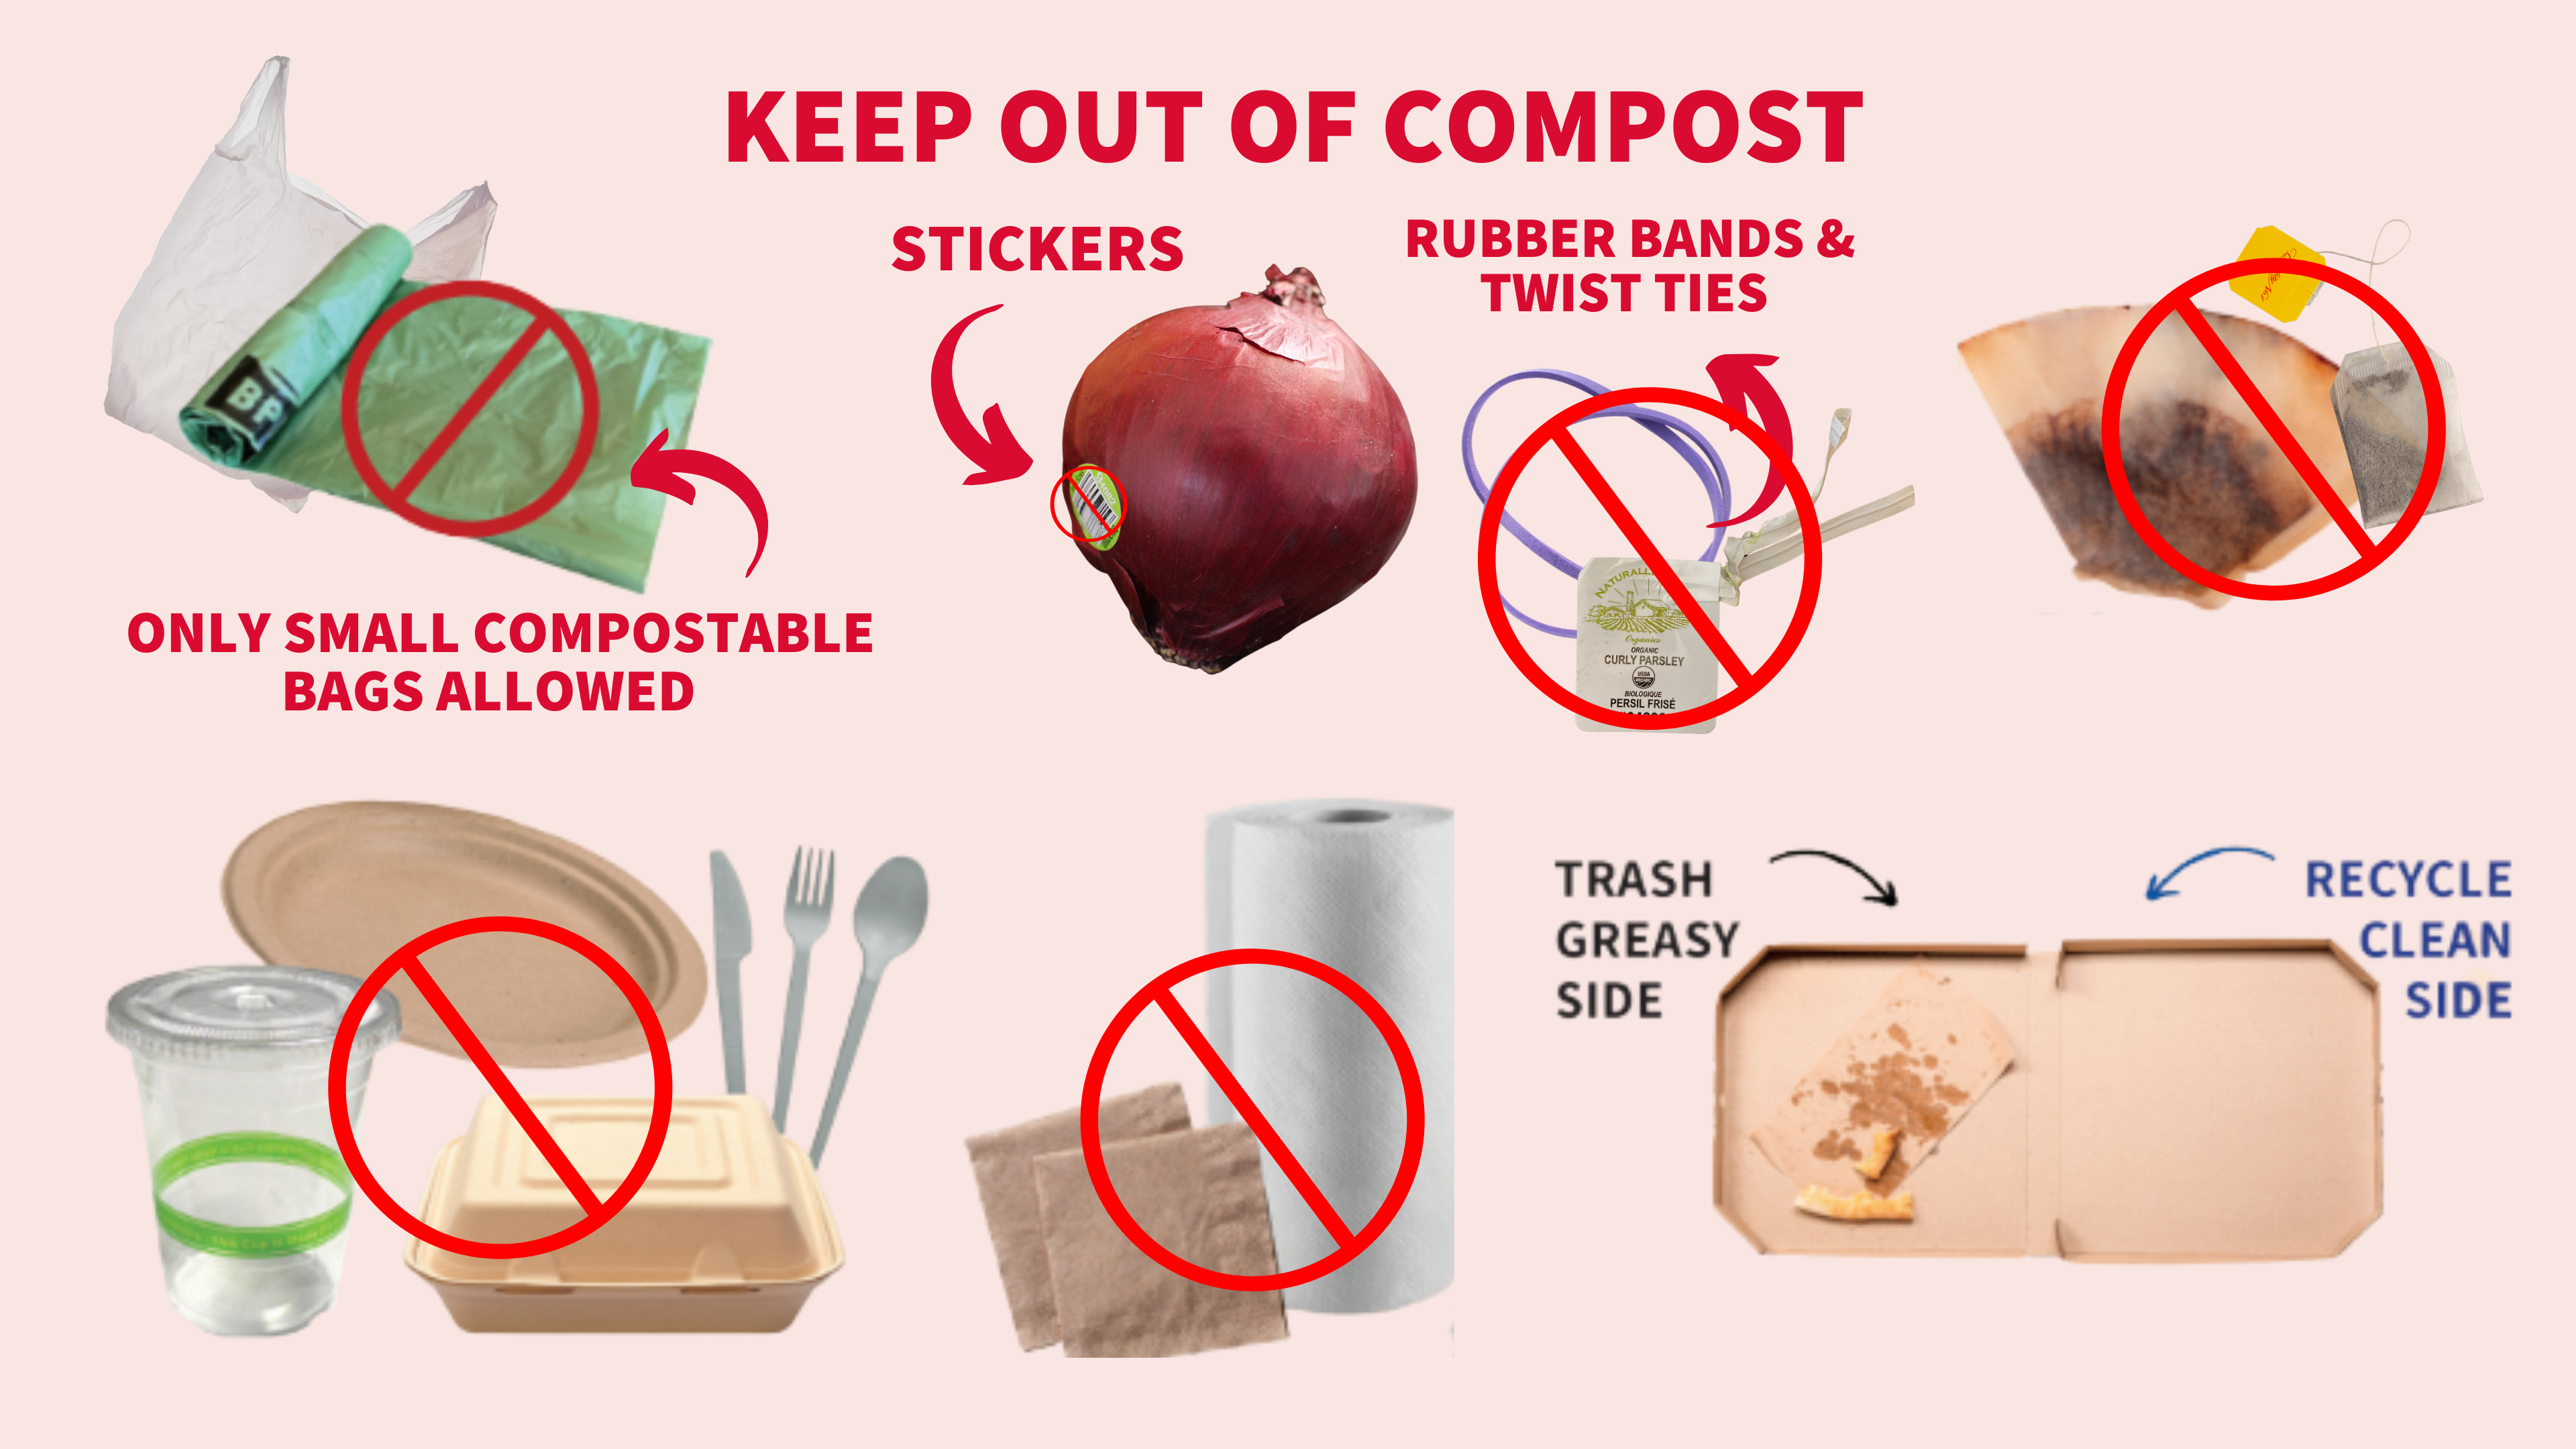 Things to keep out of the compost bin